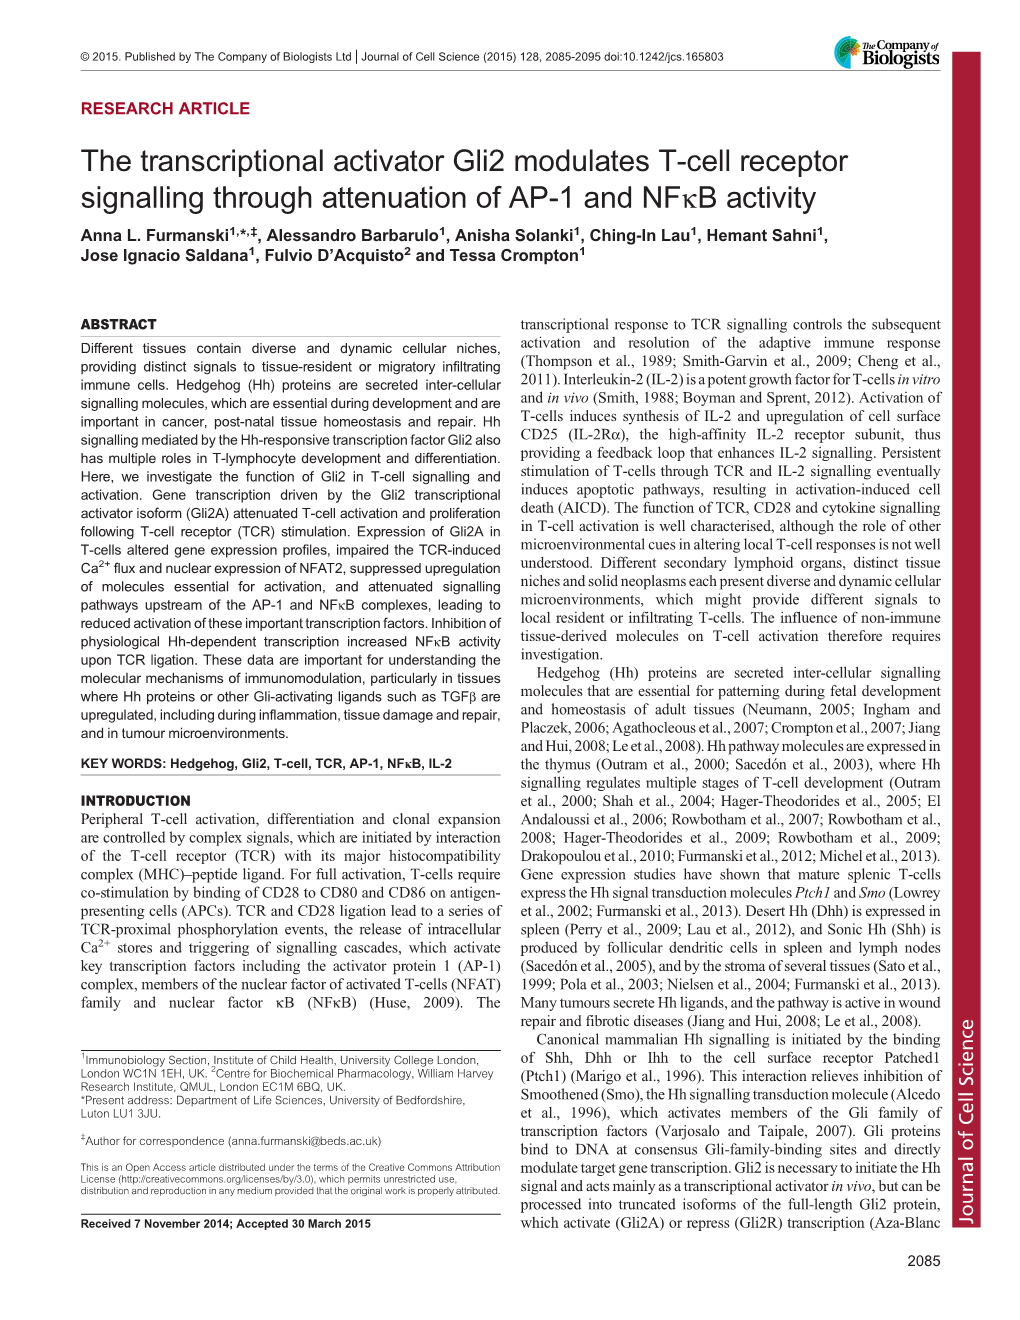 The Transcriptional Activator Gli2 Modulates T-Cell Receptor Signalling Through Attenuation of AP-1 and Nfκb Activity Anna L